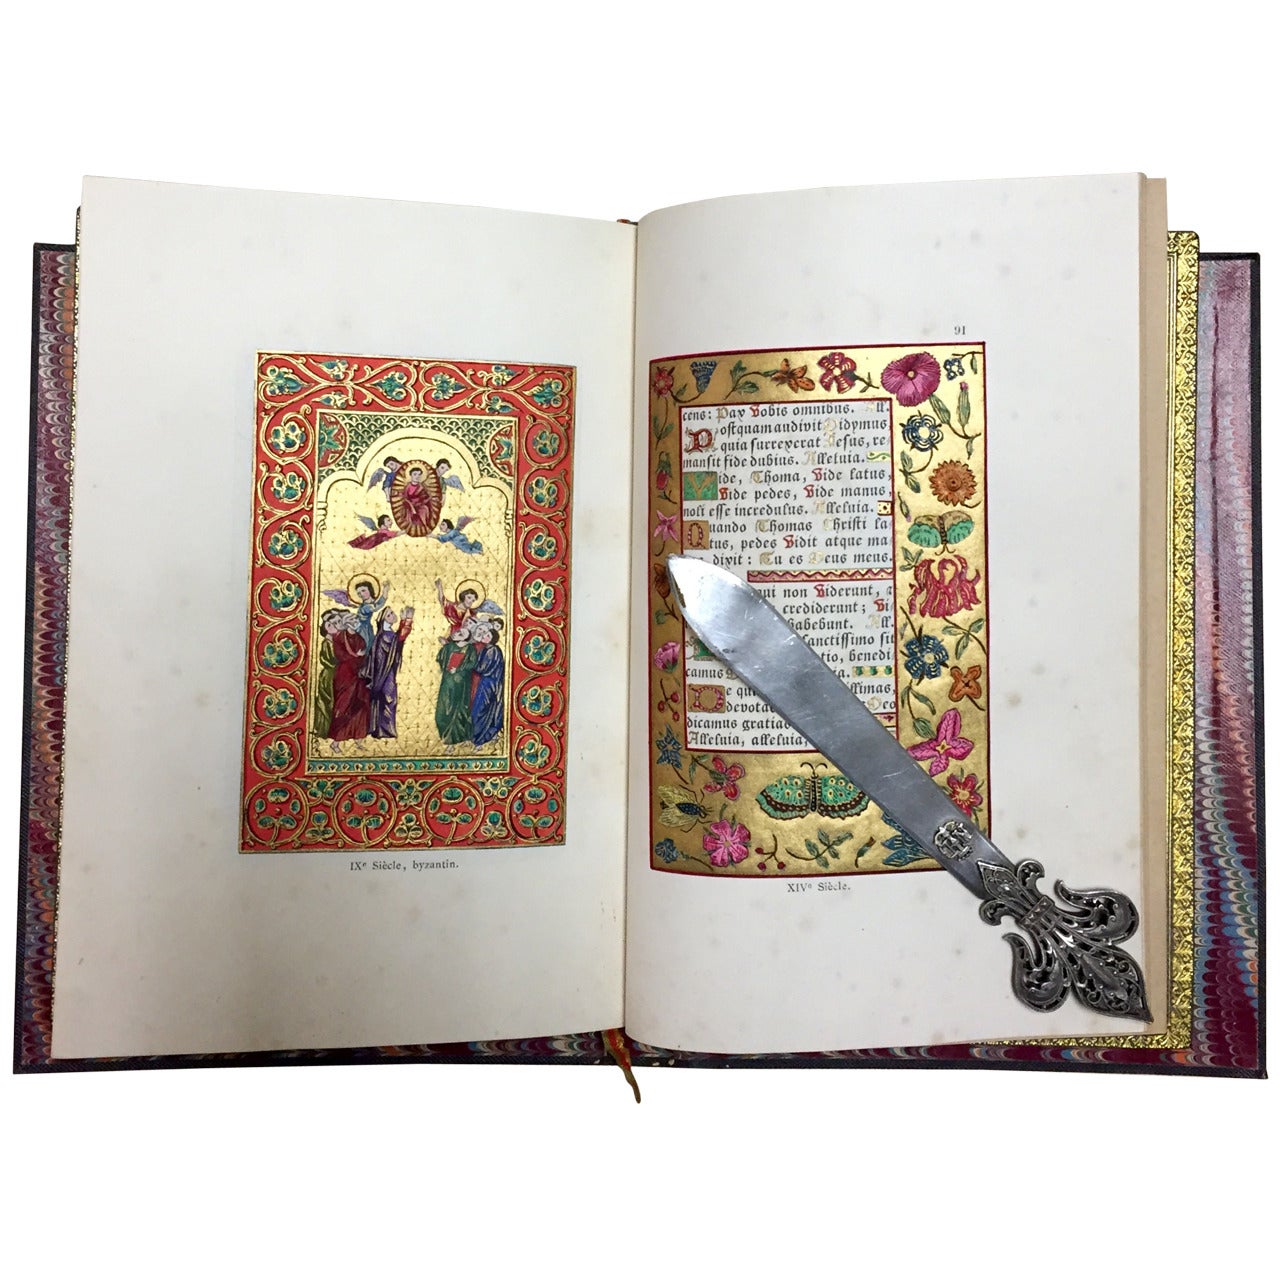 Rare French Illuminated Book of Hours "Livre d'Heures" by M. Guilbert